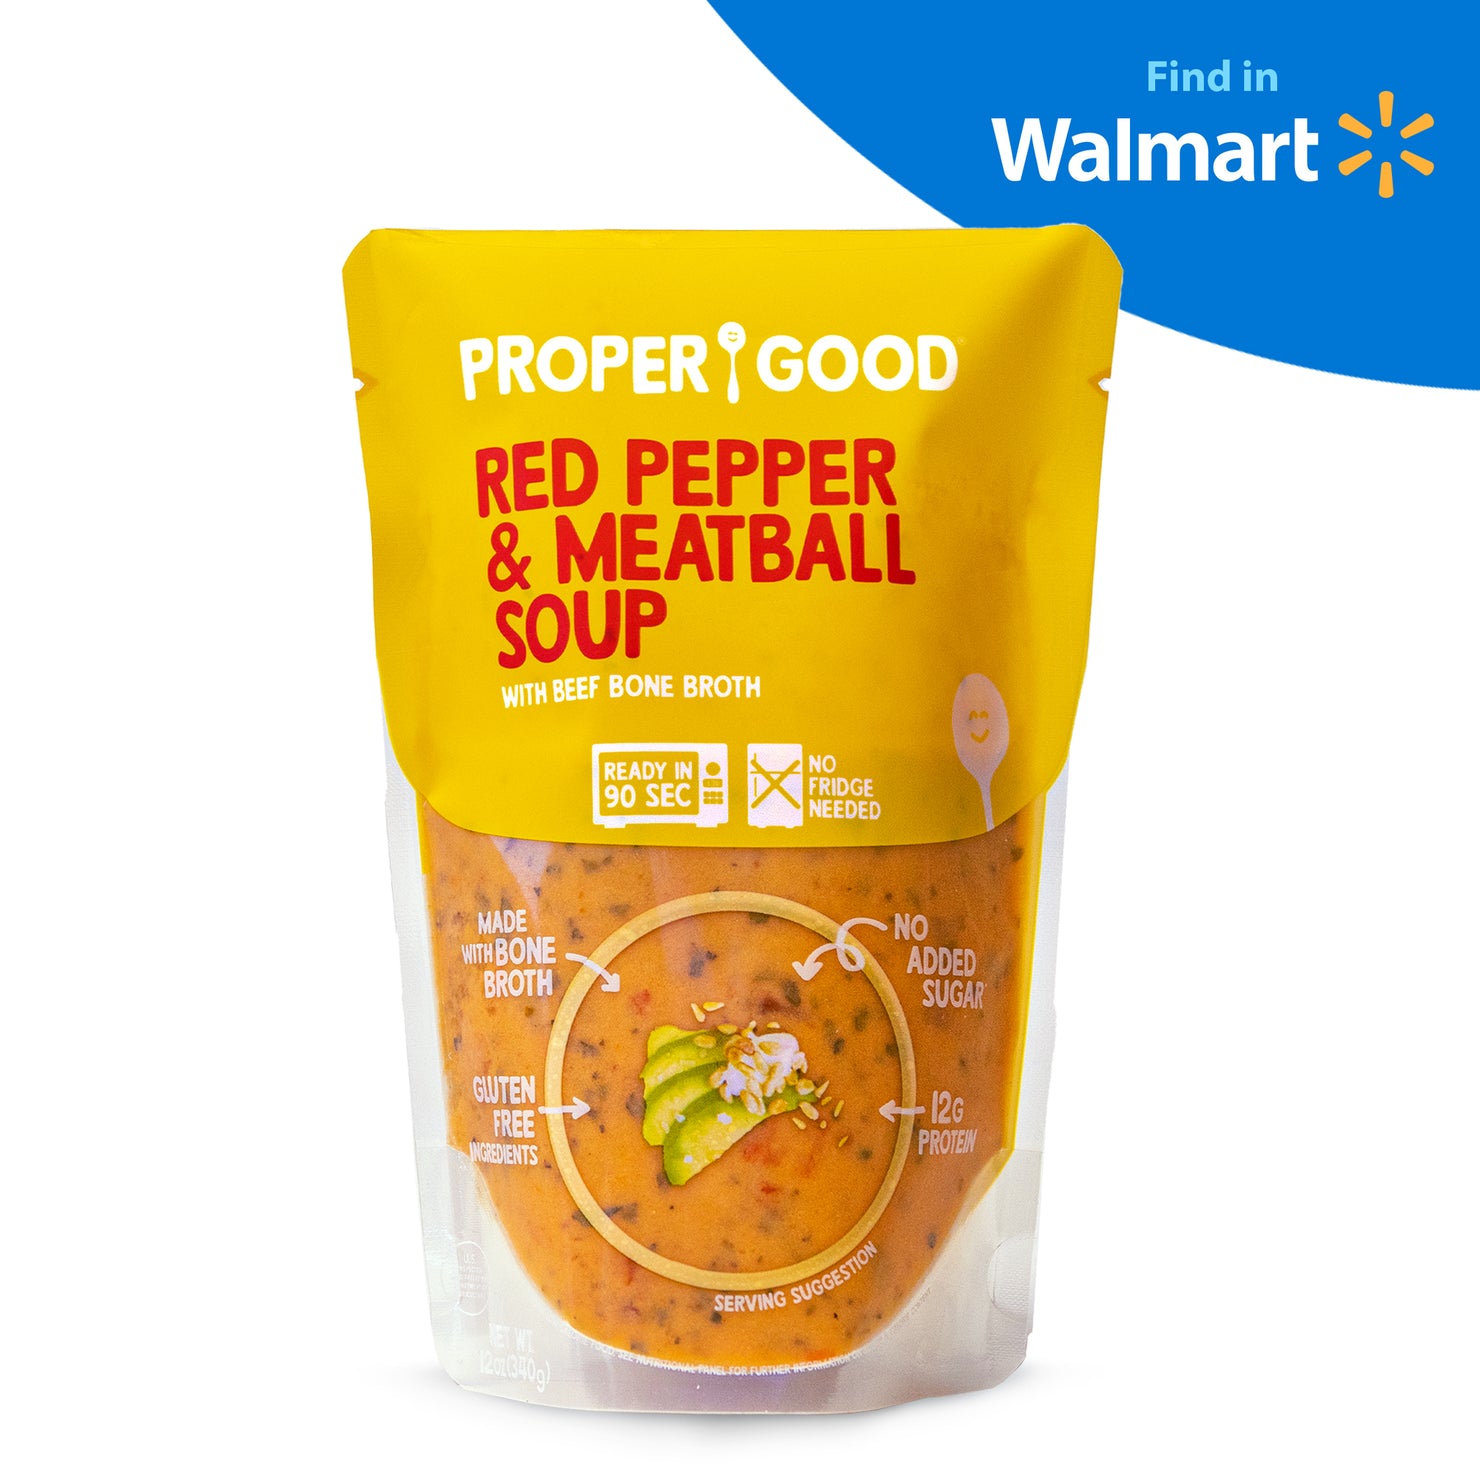 Sweet Red Pepper & Meatball Soup in Bowl and in Pouch - Find in Walmart - Eat Proper Good